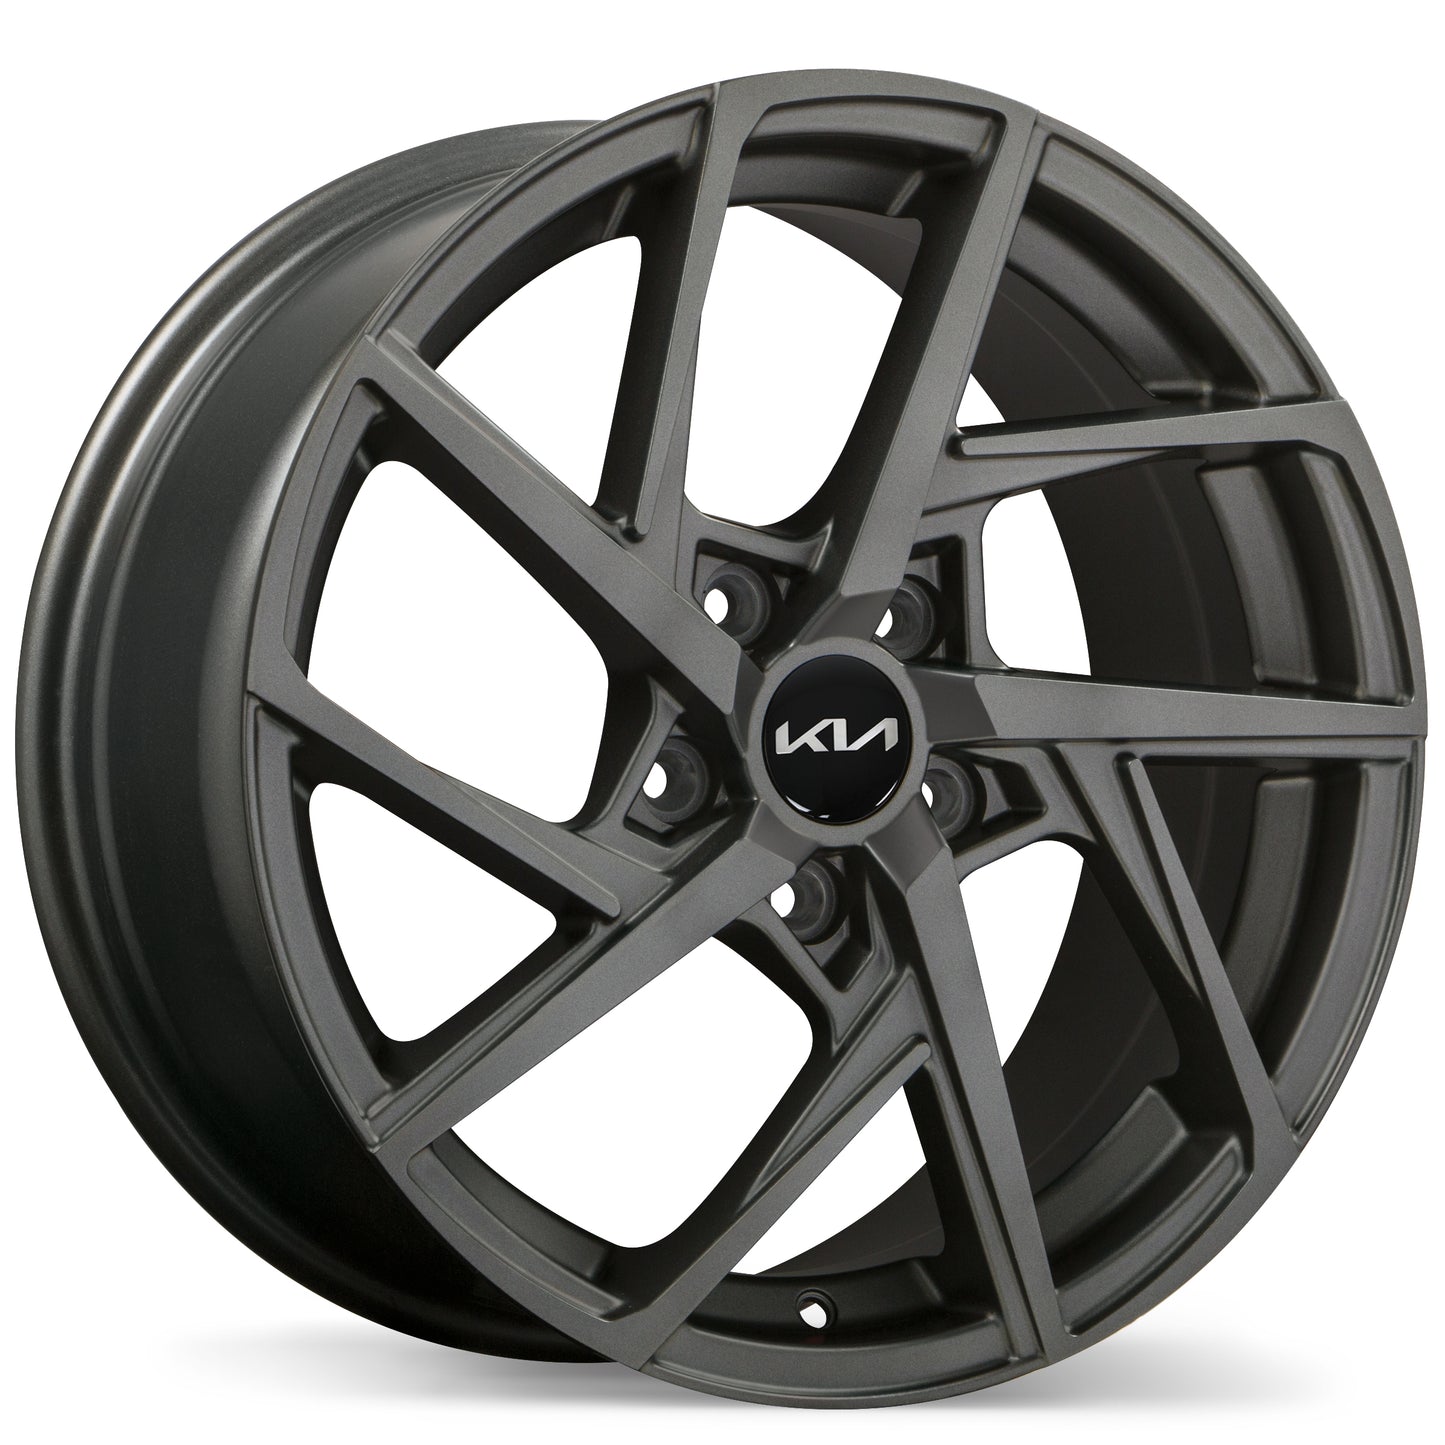 TELLURIDE SIZE 245/60R18 With Alloy Wheels + TPMS  TELPKG1